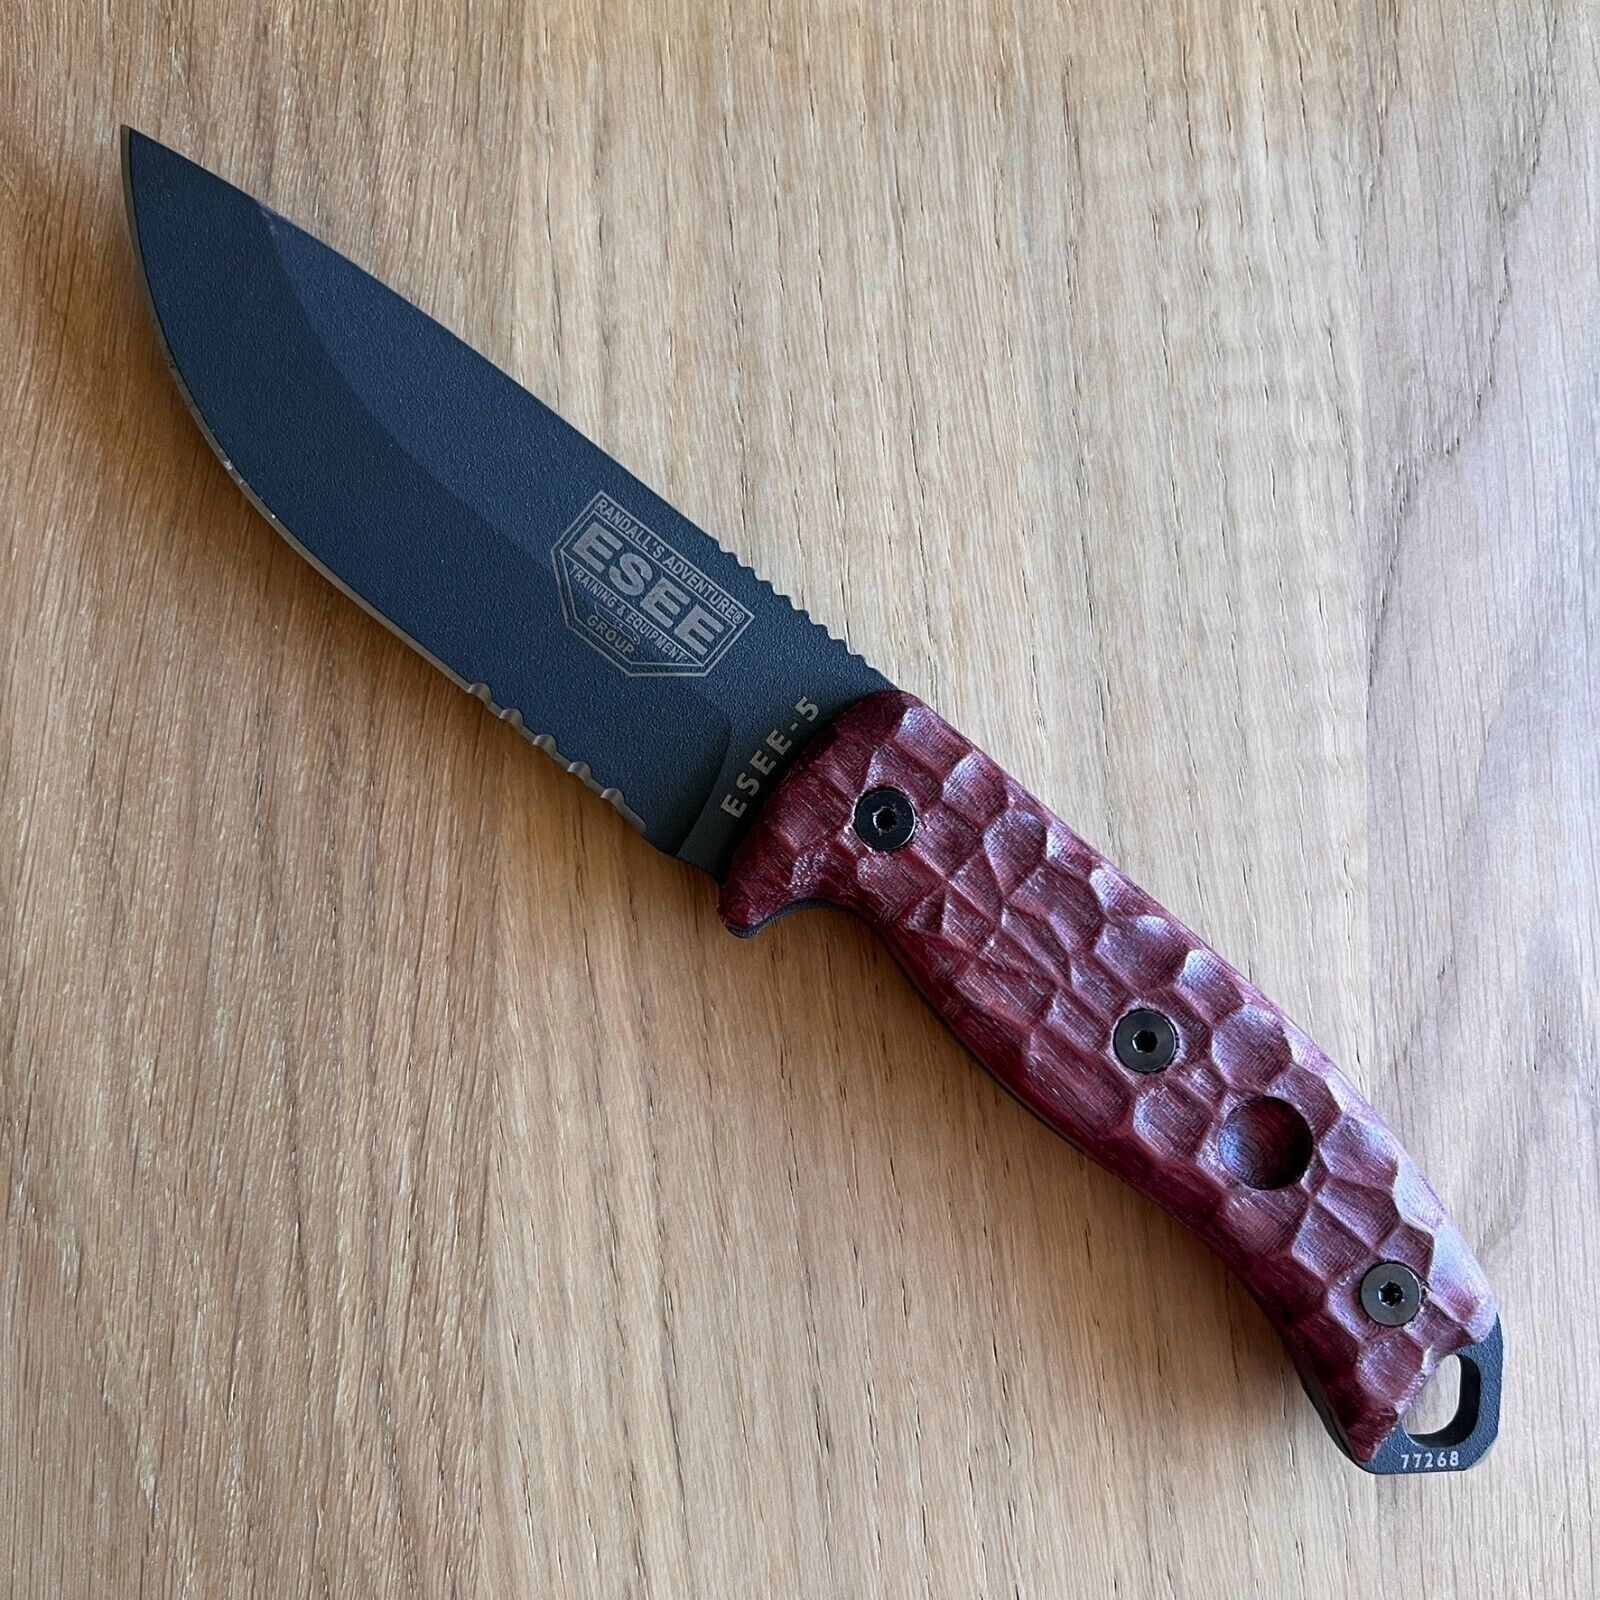 ESEE-5/6 Textured Purple heart exotic wood scales